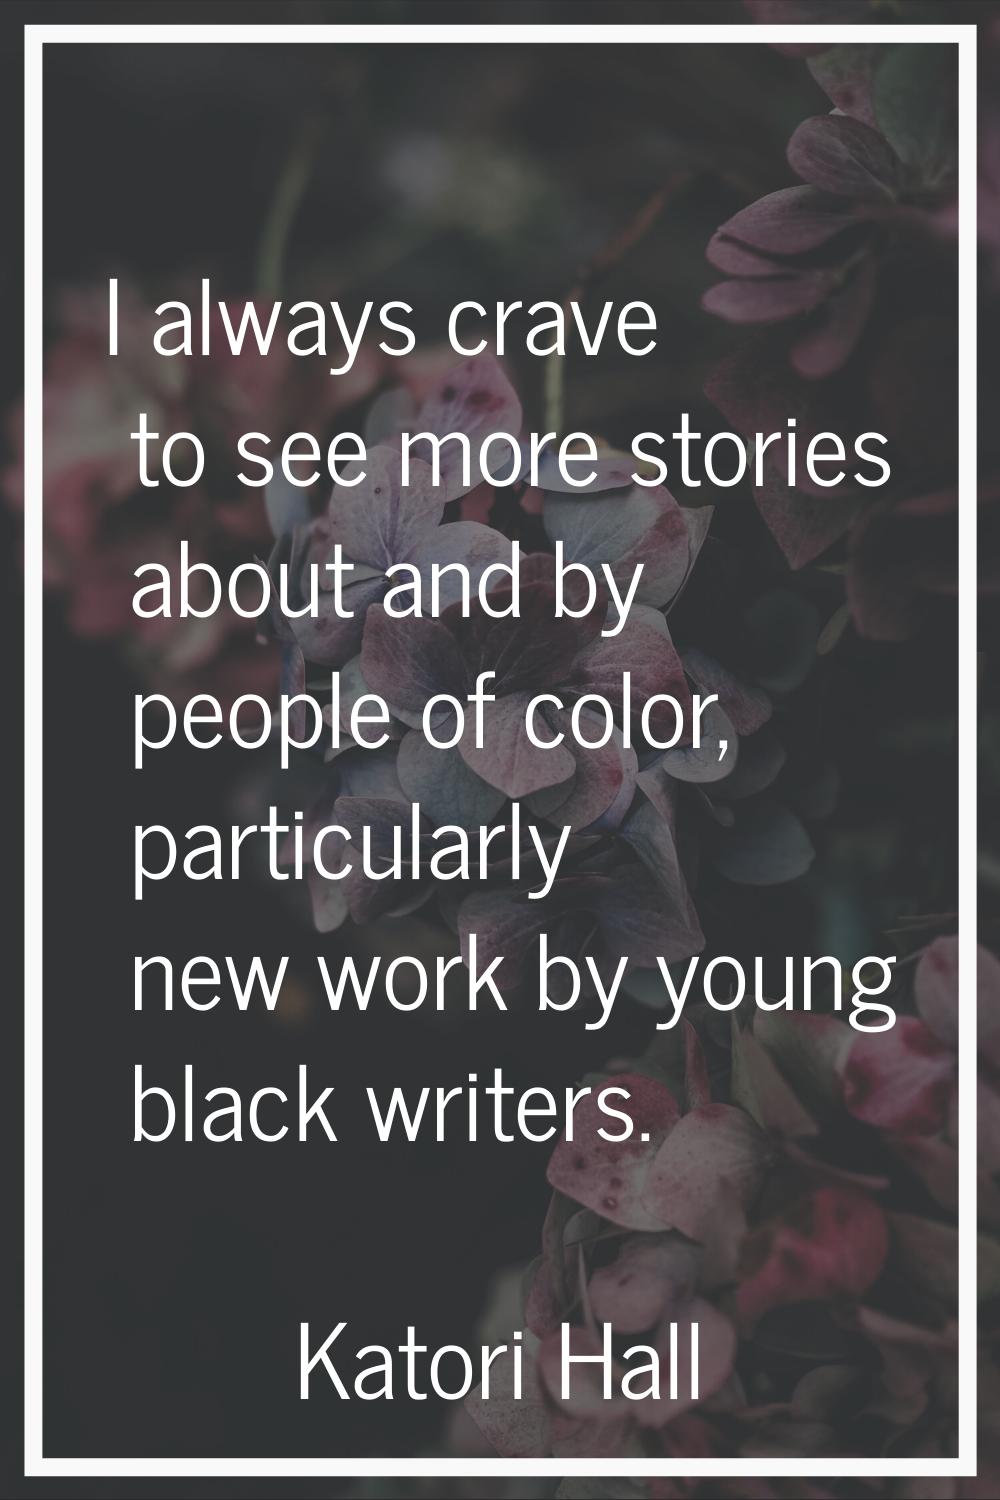 I always crave to see more stories about and by people of color, particularly new work by young bla